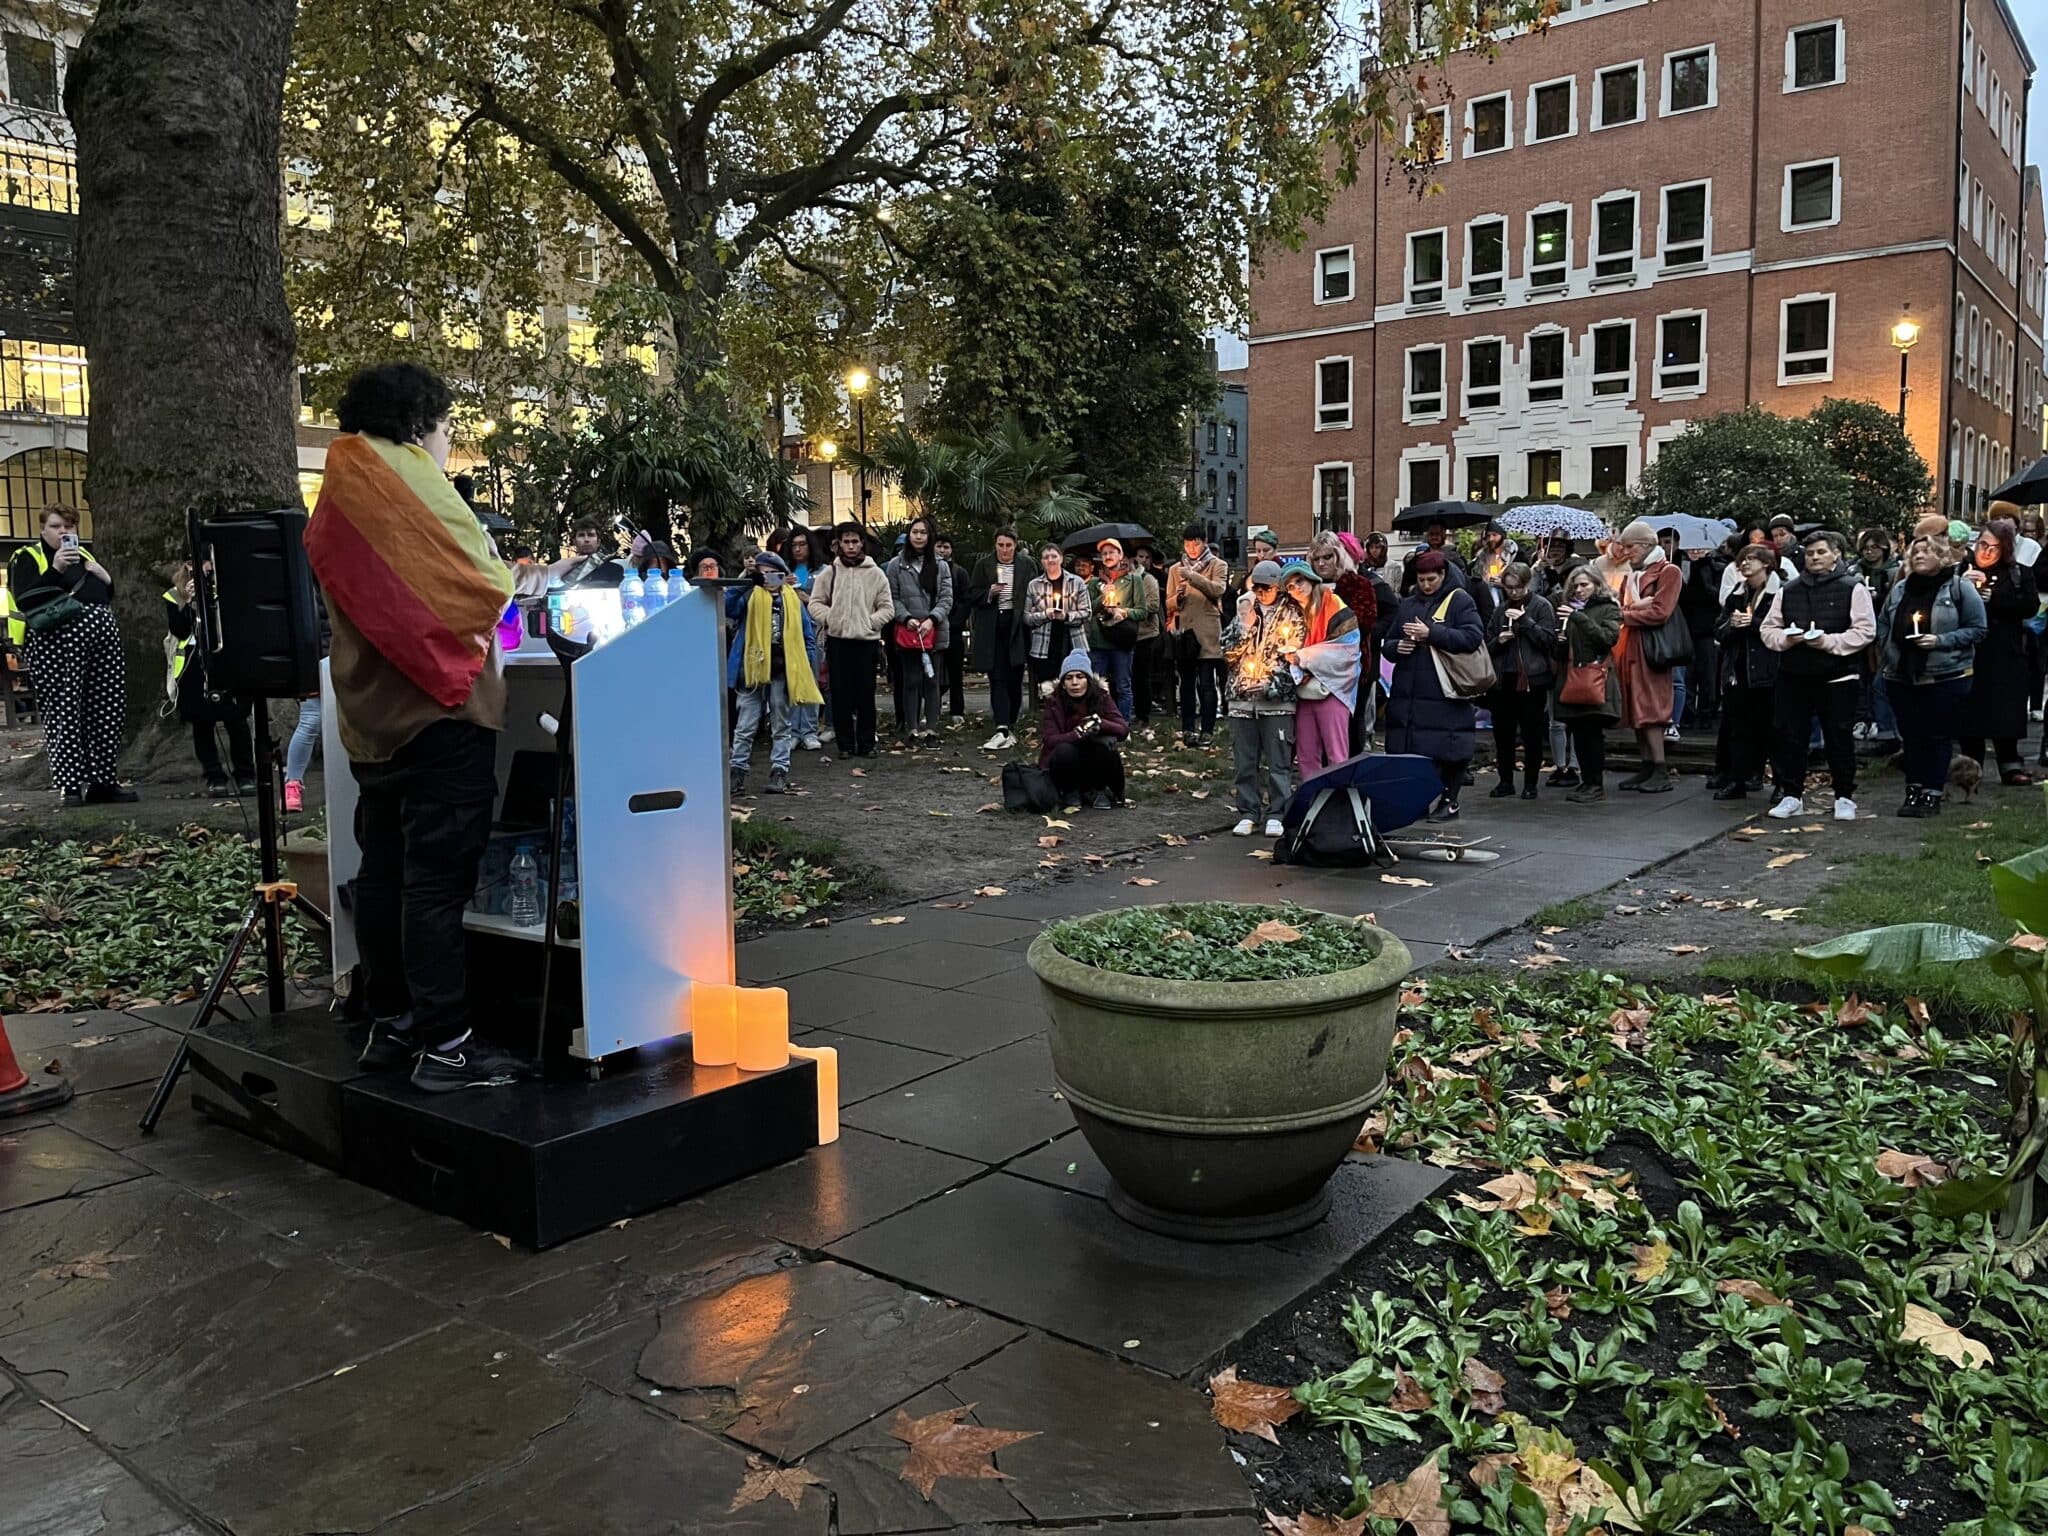 A trans activist speaks during the Soho Square Trans Day of Remembrance.